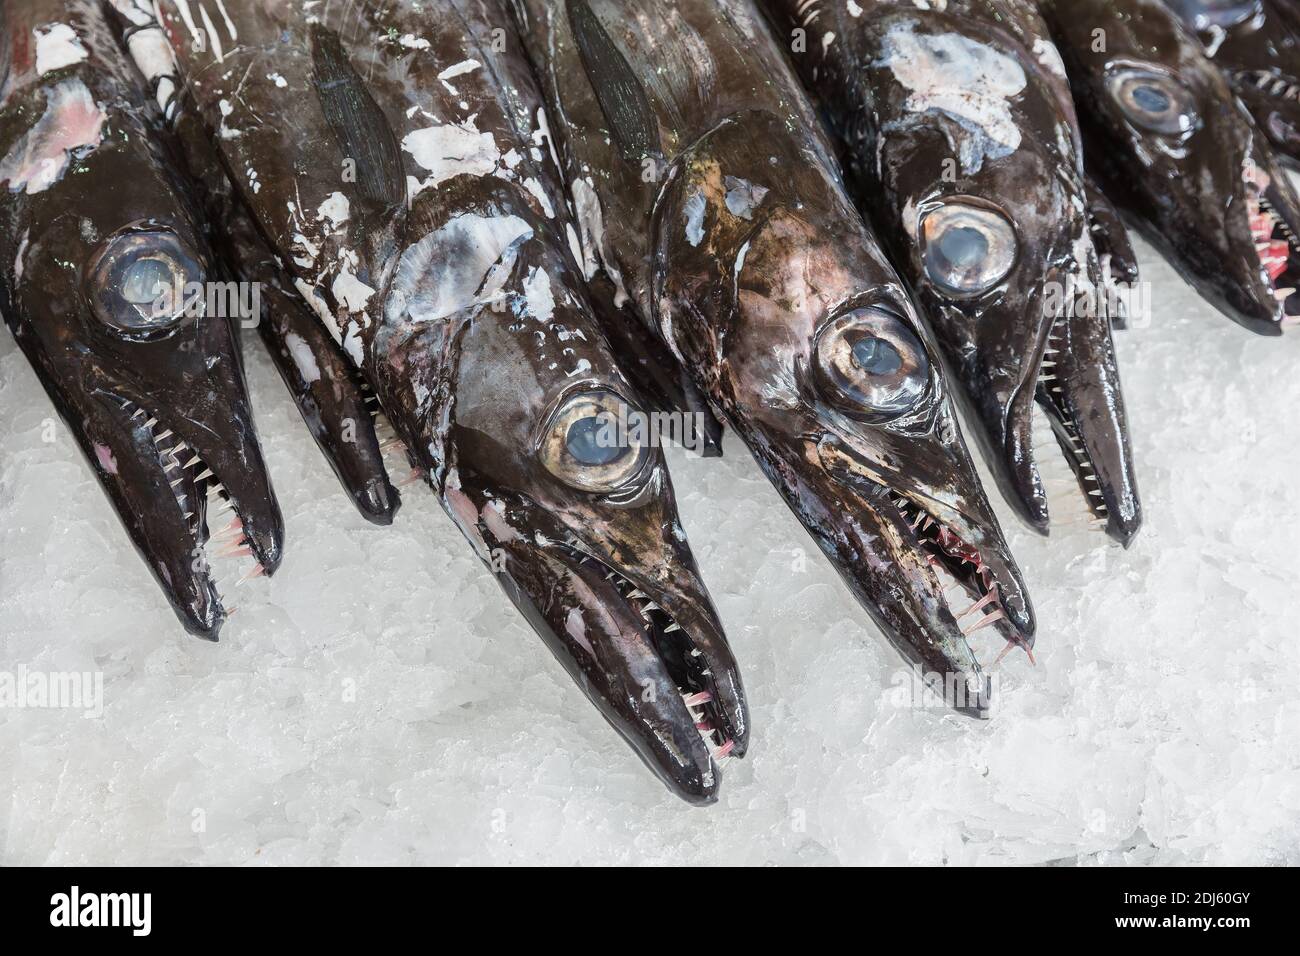 Black scabbard in fish market Funchal at Portugese Madeira Island Stock Photo